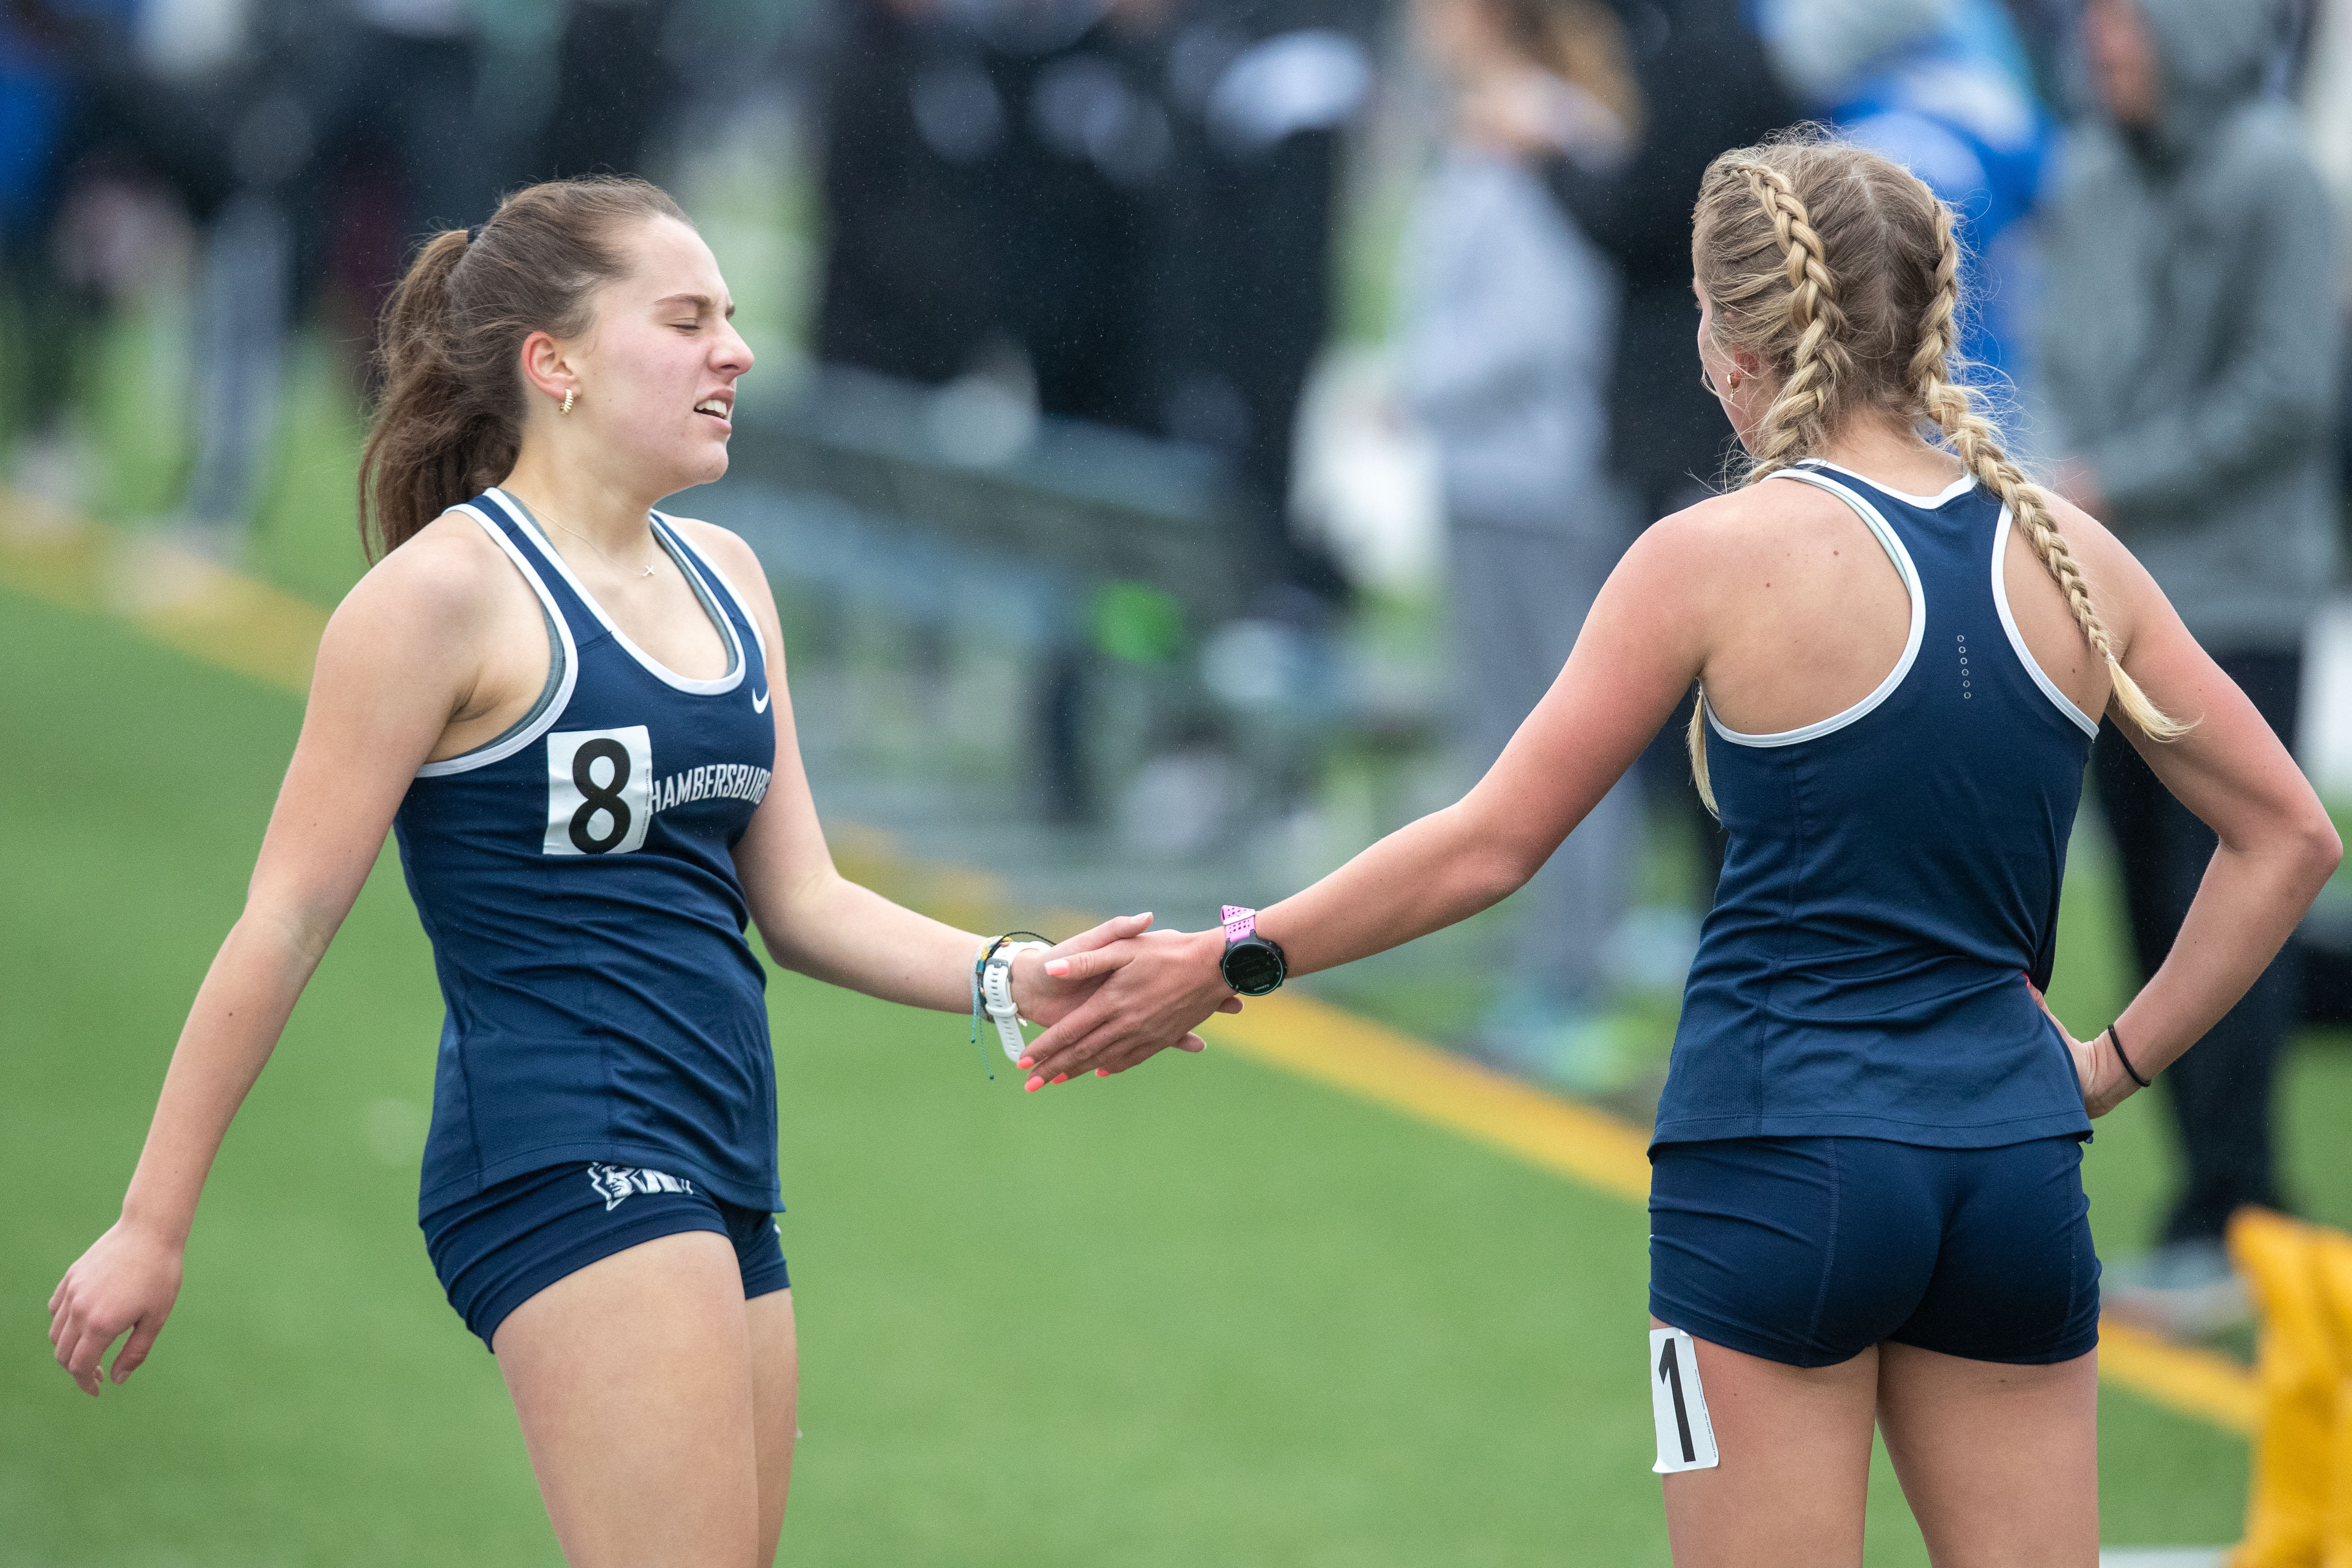 Chambersburg’s Madelyn Koons and Camryn Kiser finish 3, 1, in the 1600 meter race at the 2023 Tim Cook Memorial Invitational track & field meet at Chambersburg, Pa., Mar. 25, 2023.Mark Pynes | pennlive.com